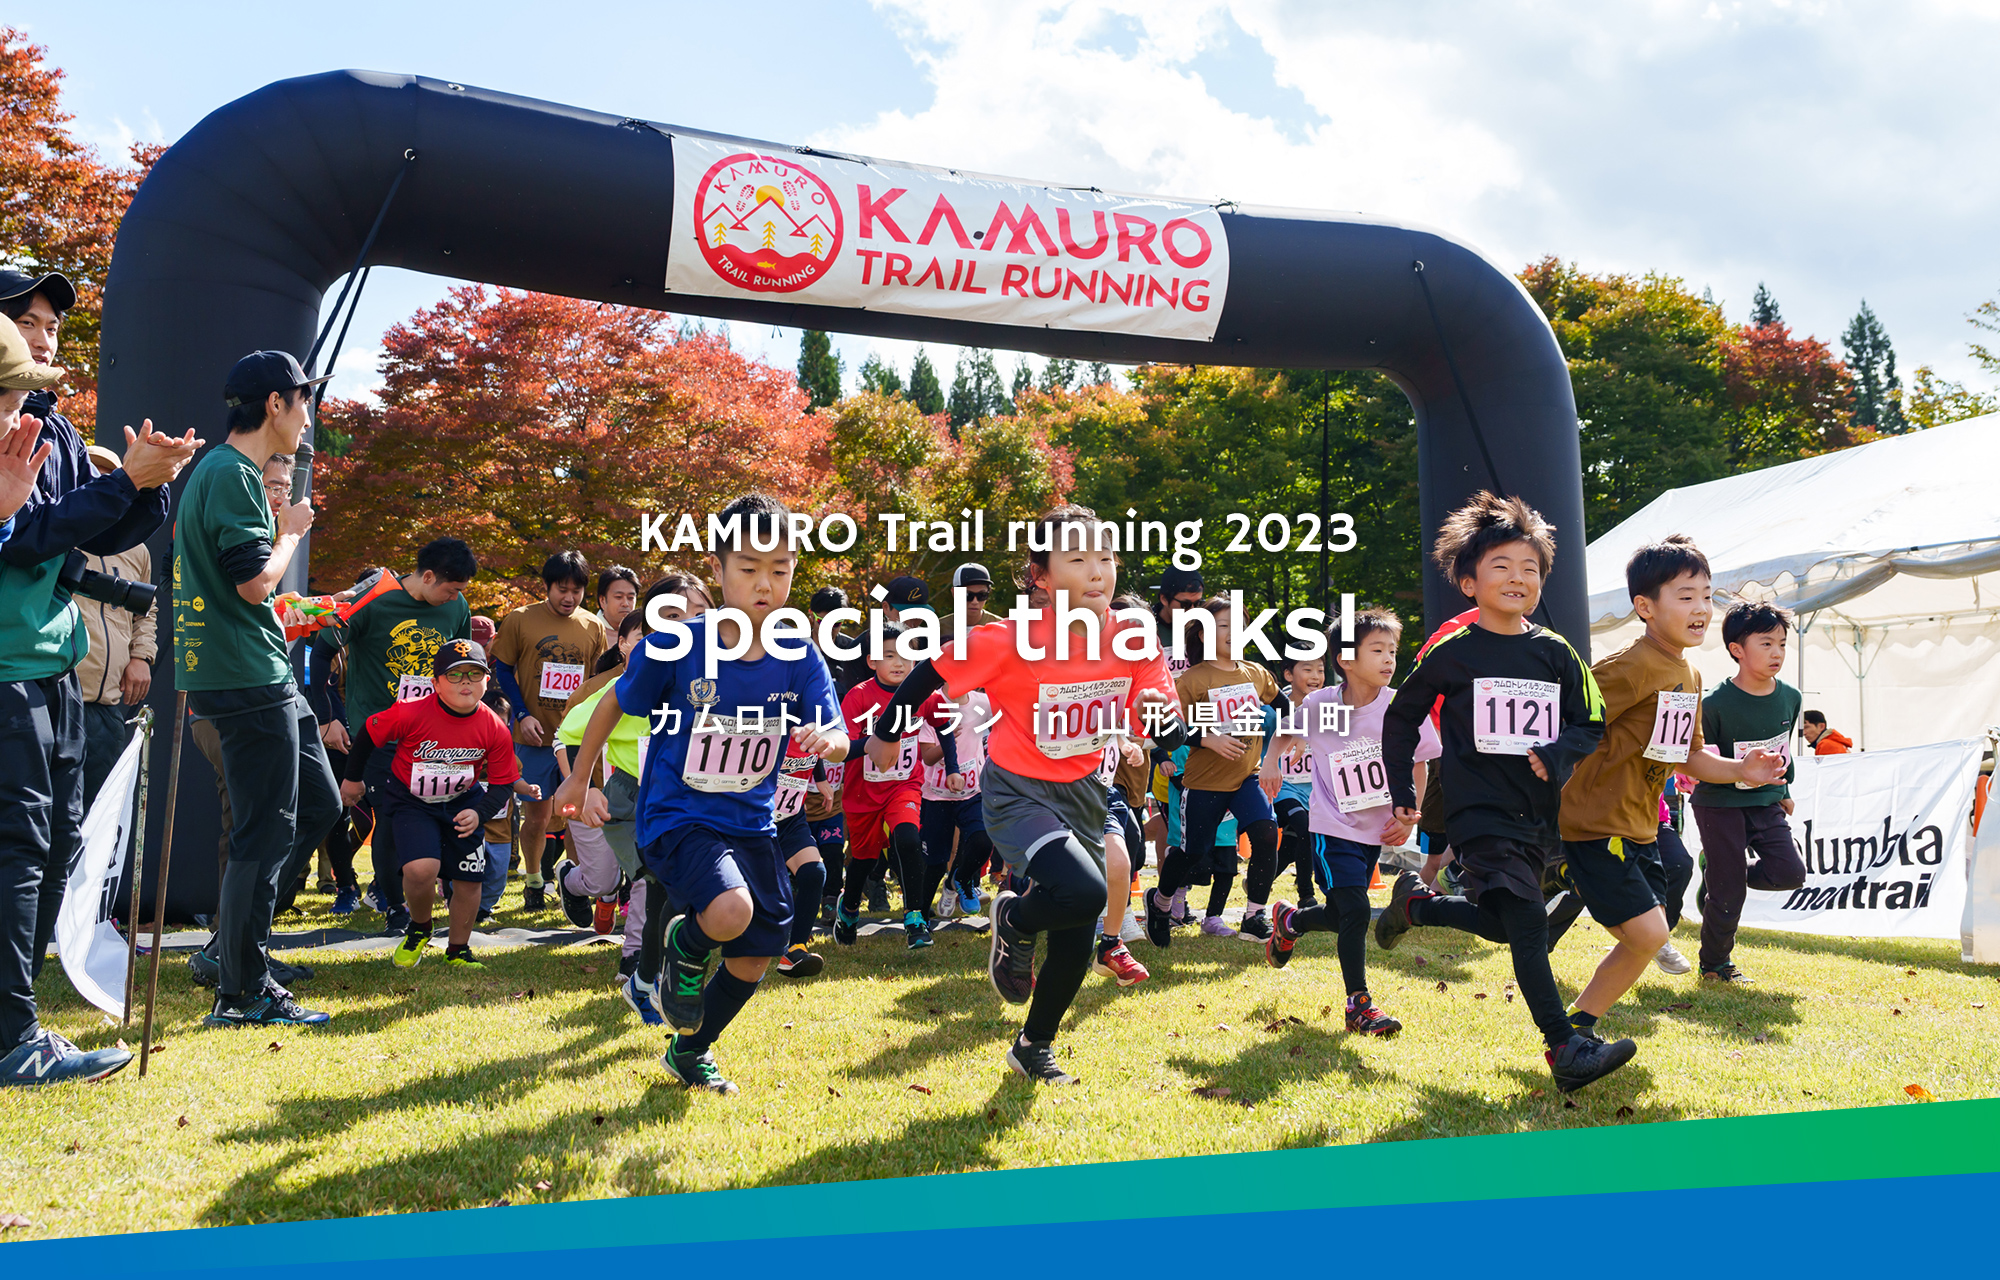 KAUMURO Trail running 2023 Special thanks！ カムロトレイルラン in ⼭形県⾦⼭町